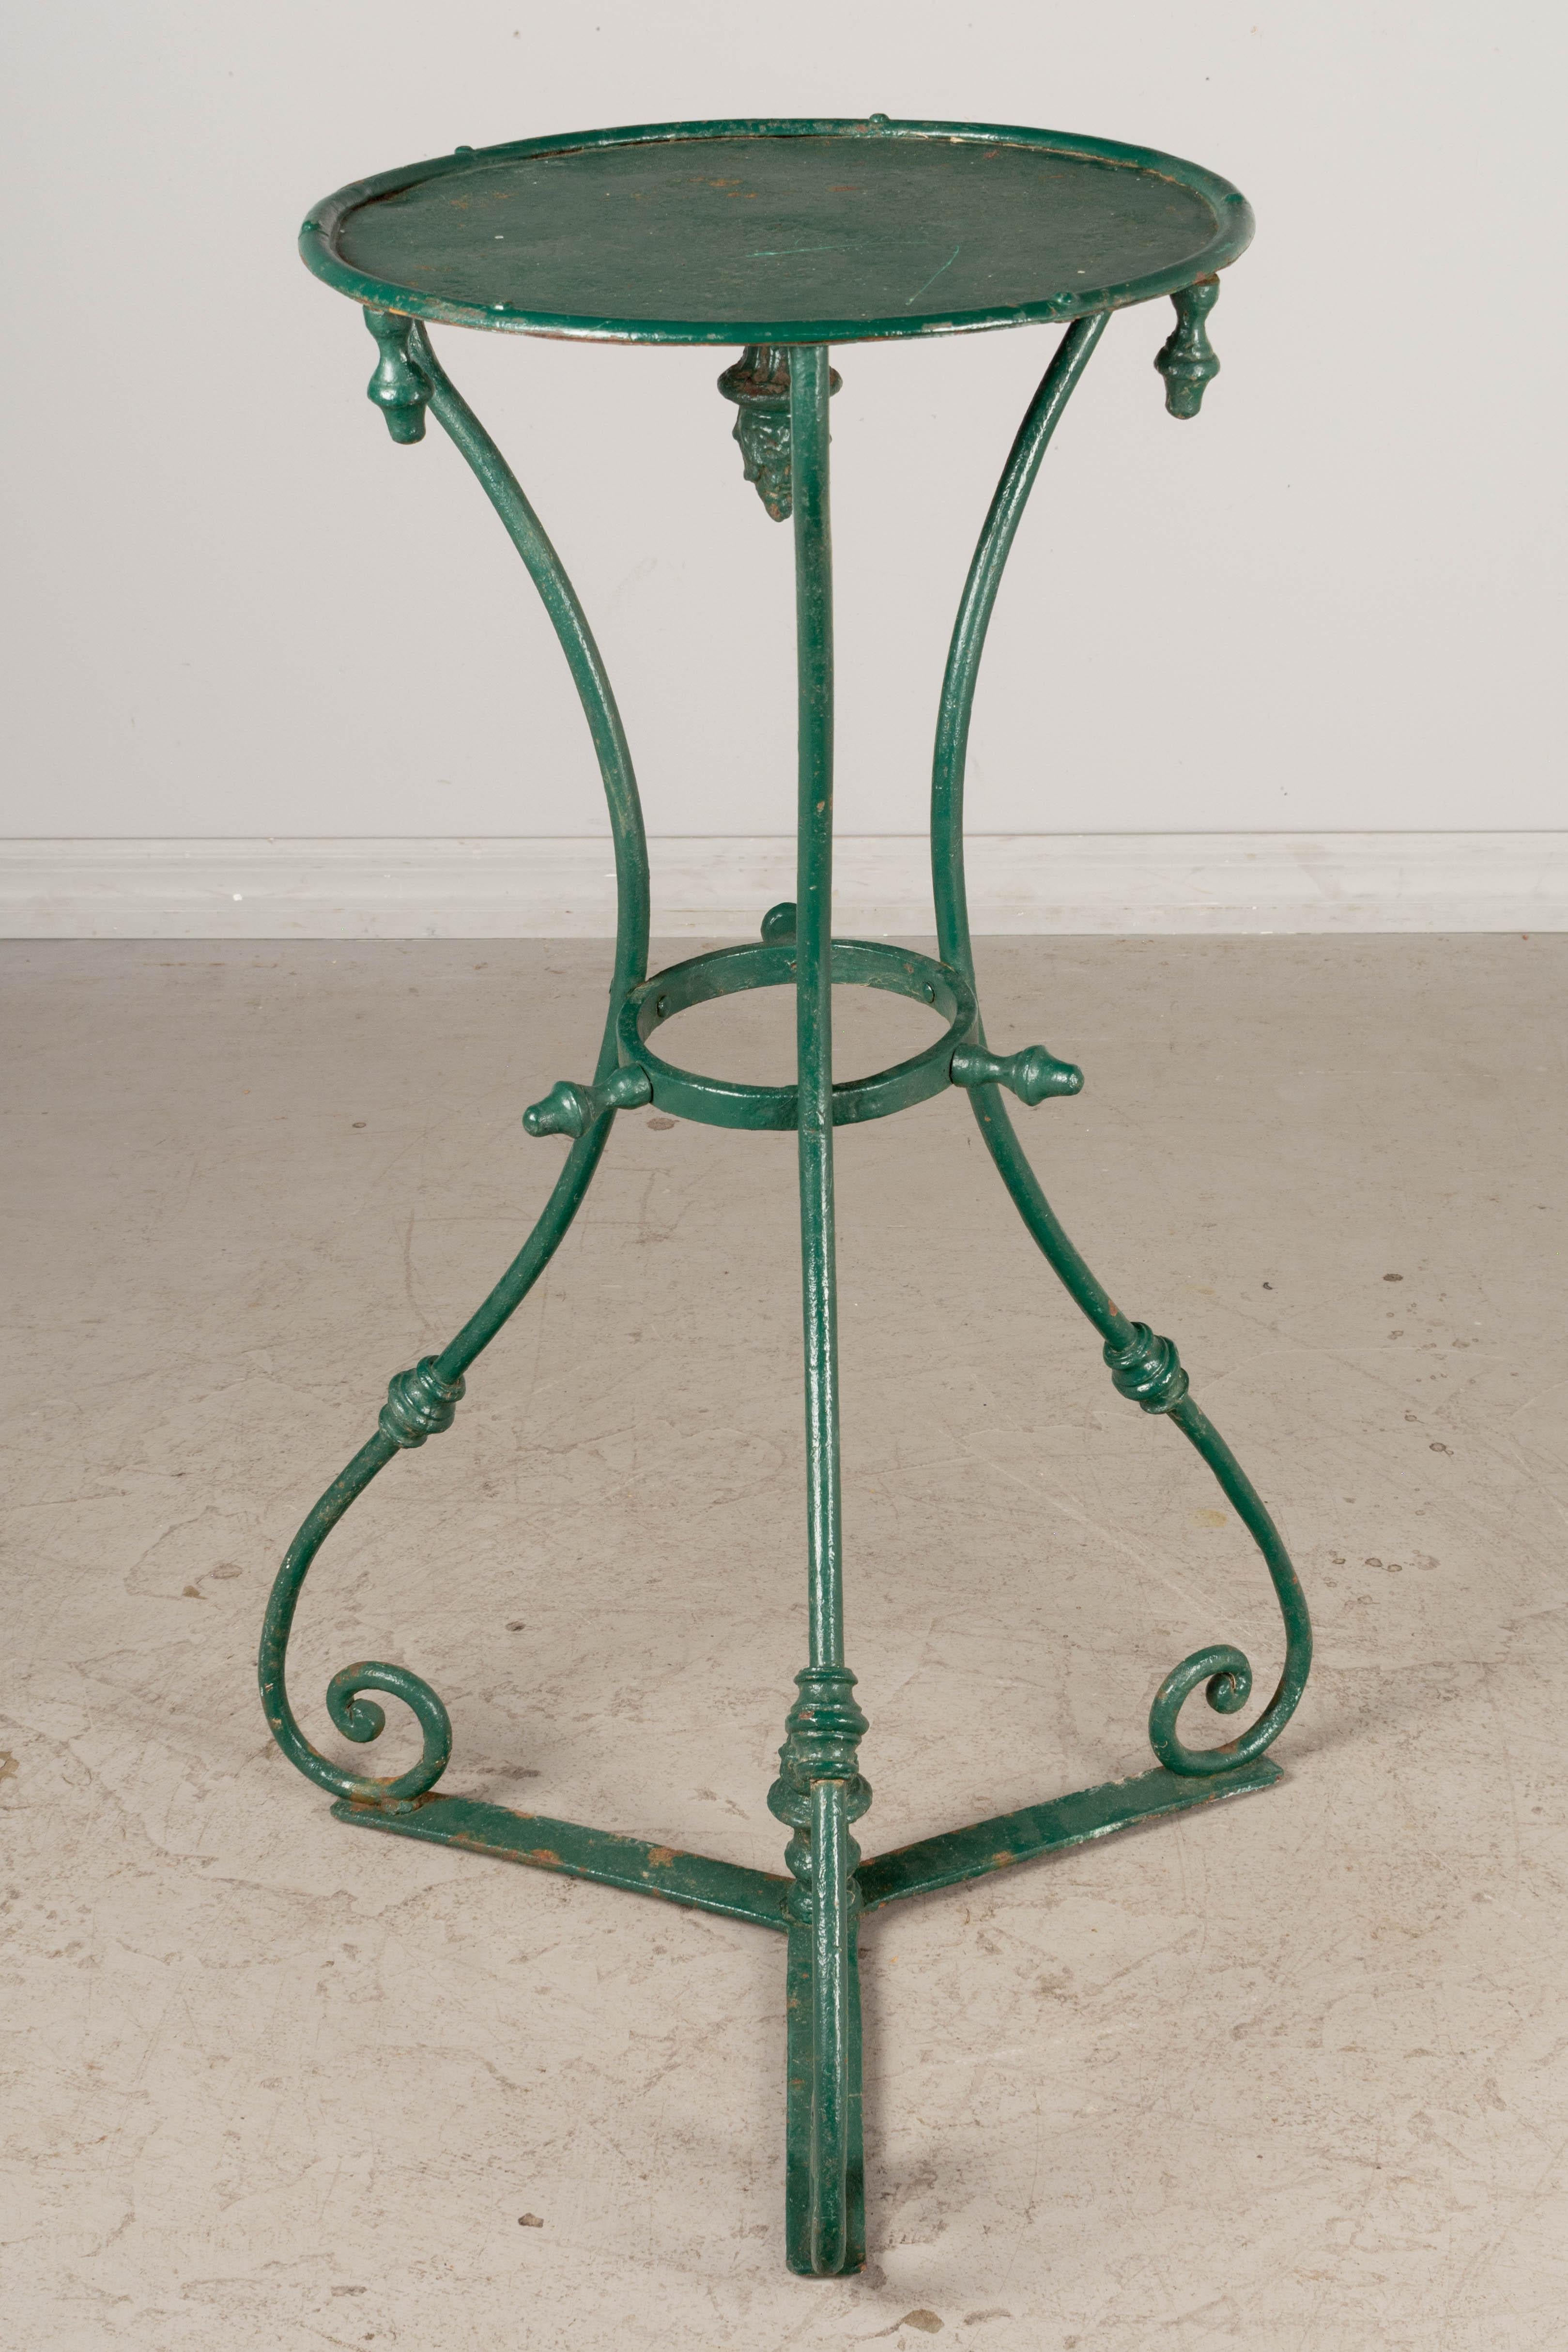 Cast 19th Century French Wrought Iron Garden Pedestal For Sale